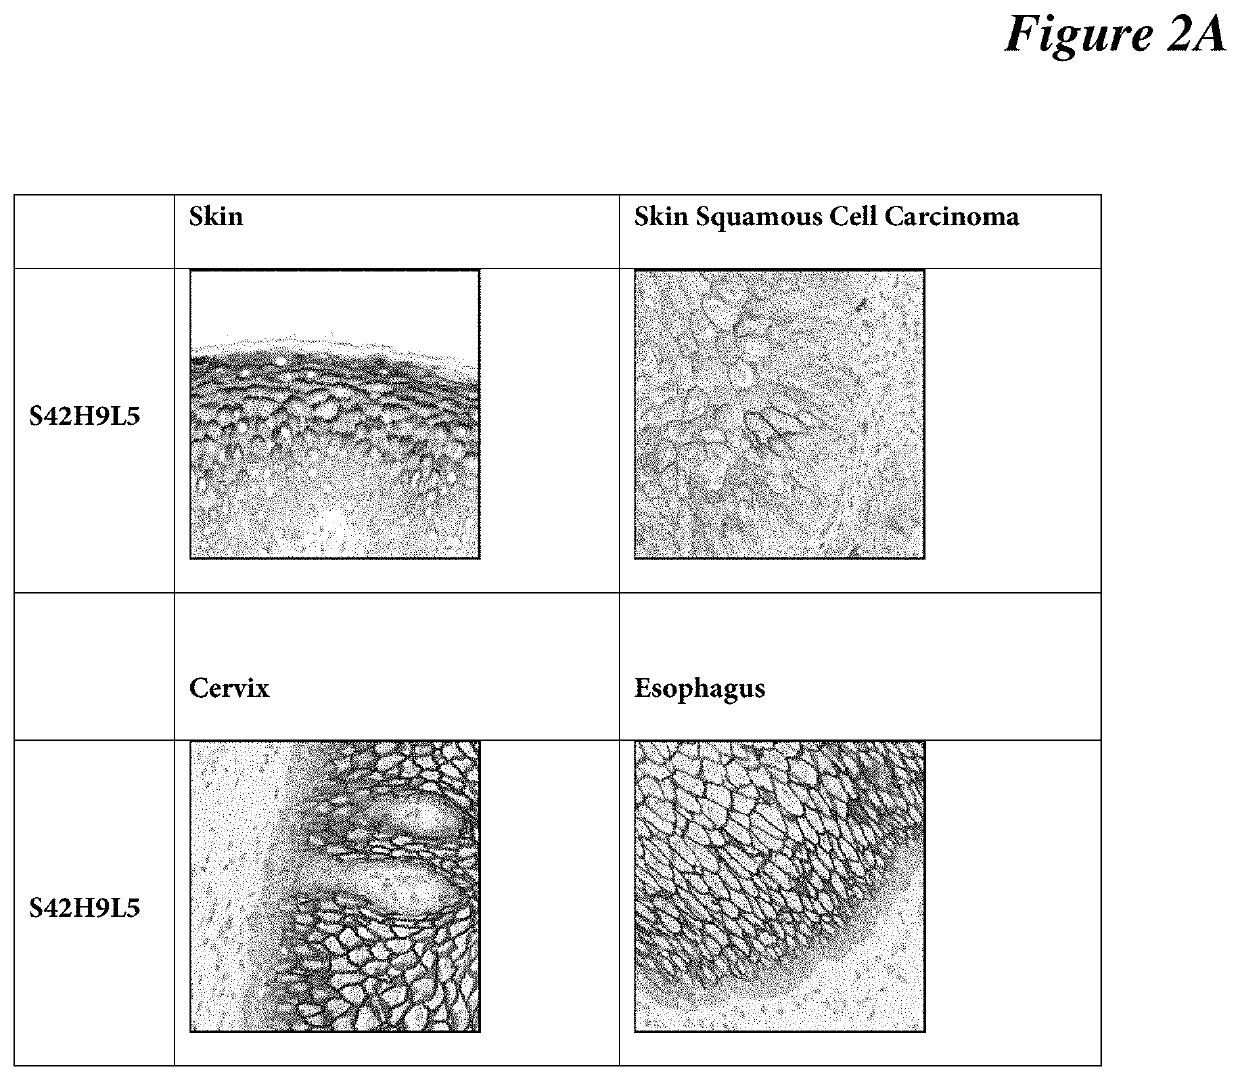 Antibodies, compositions, and immunohistochemistry methods for detecting C4.4a